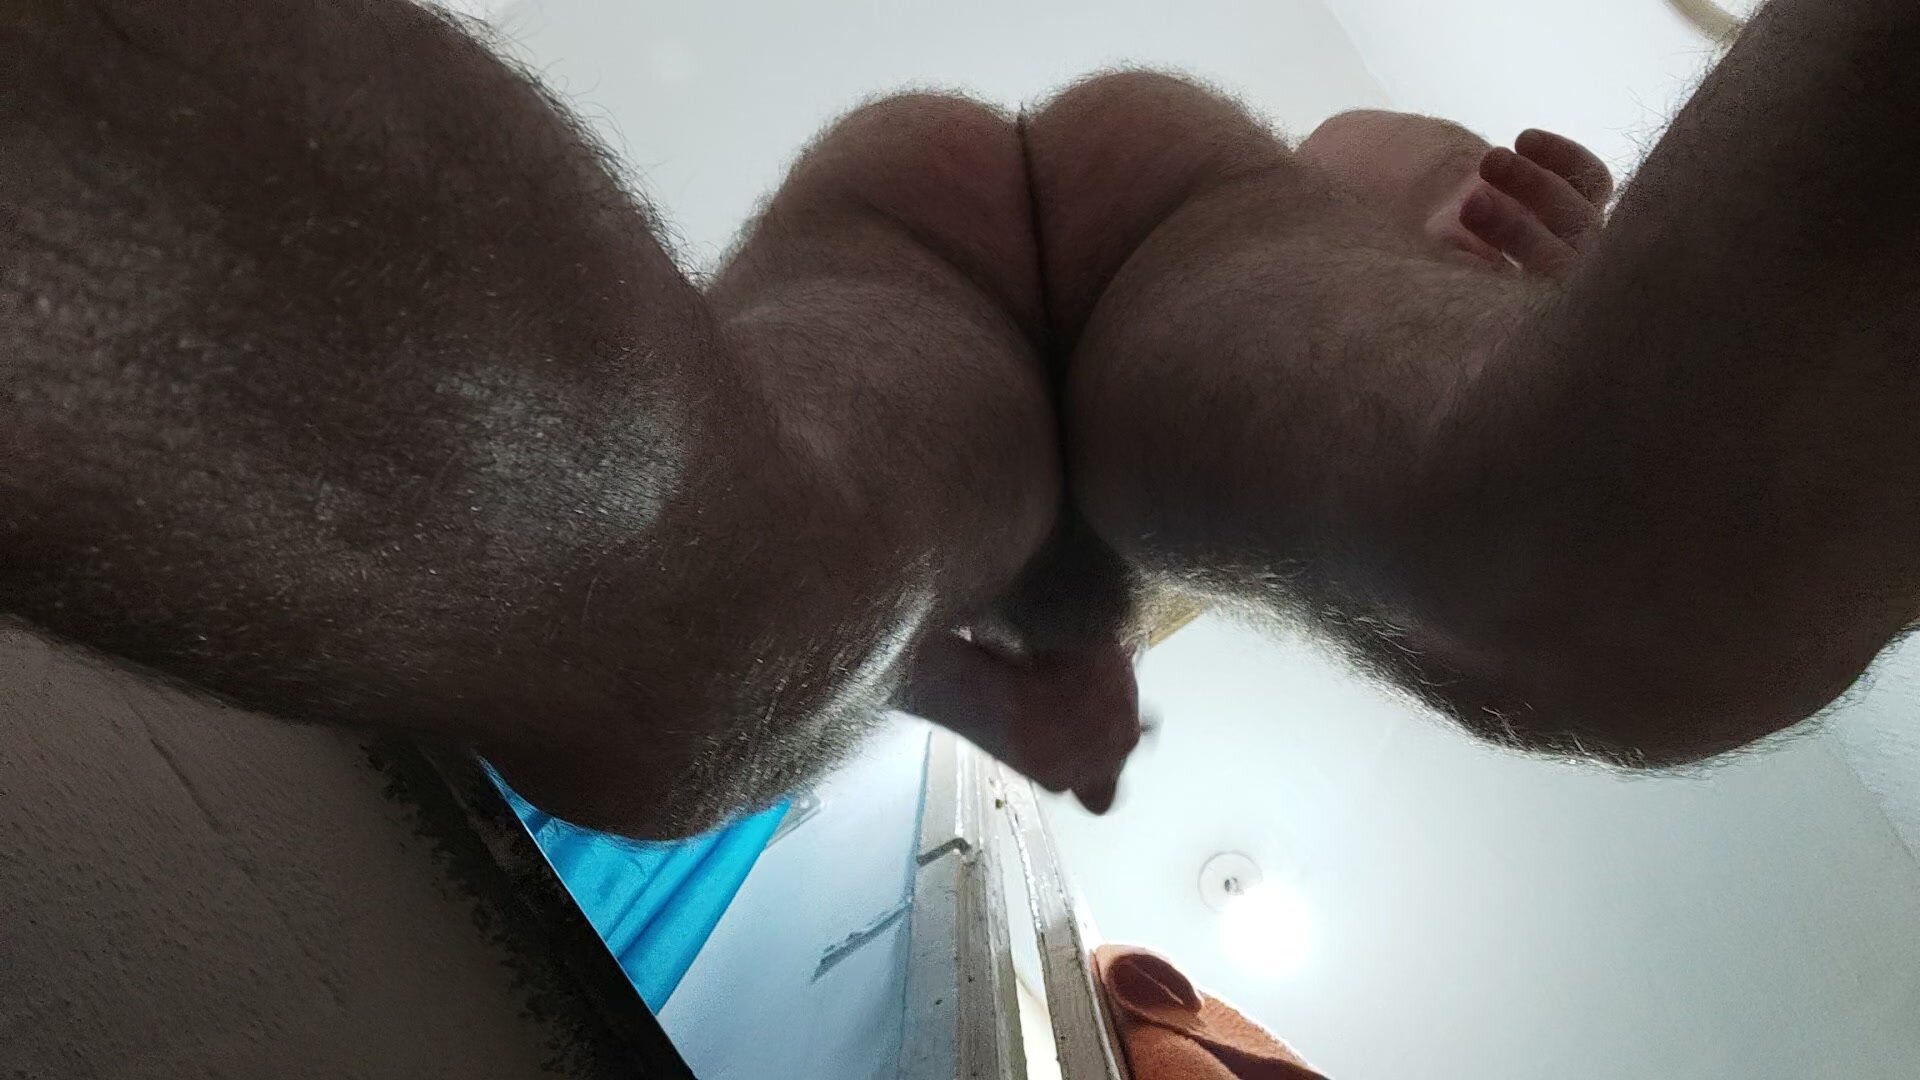 Lick my smelly hairy ass